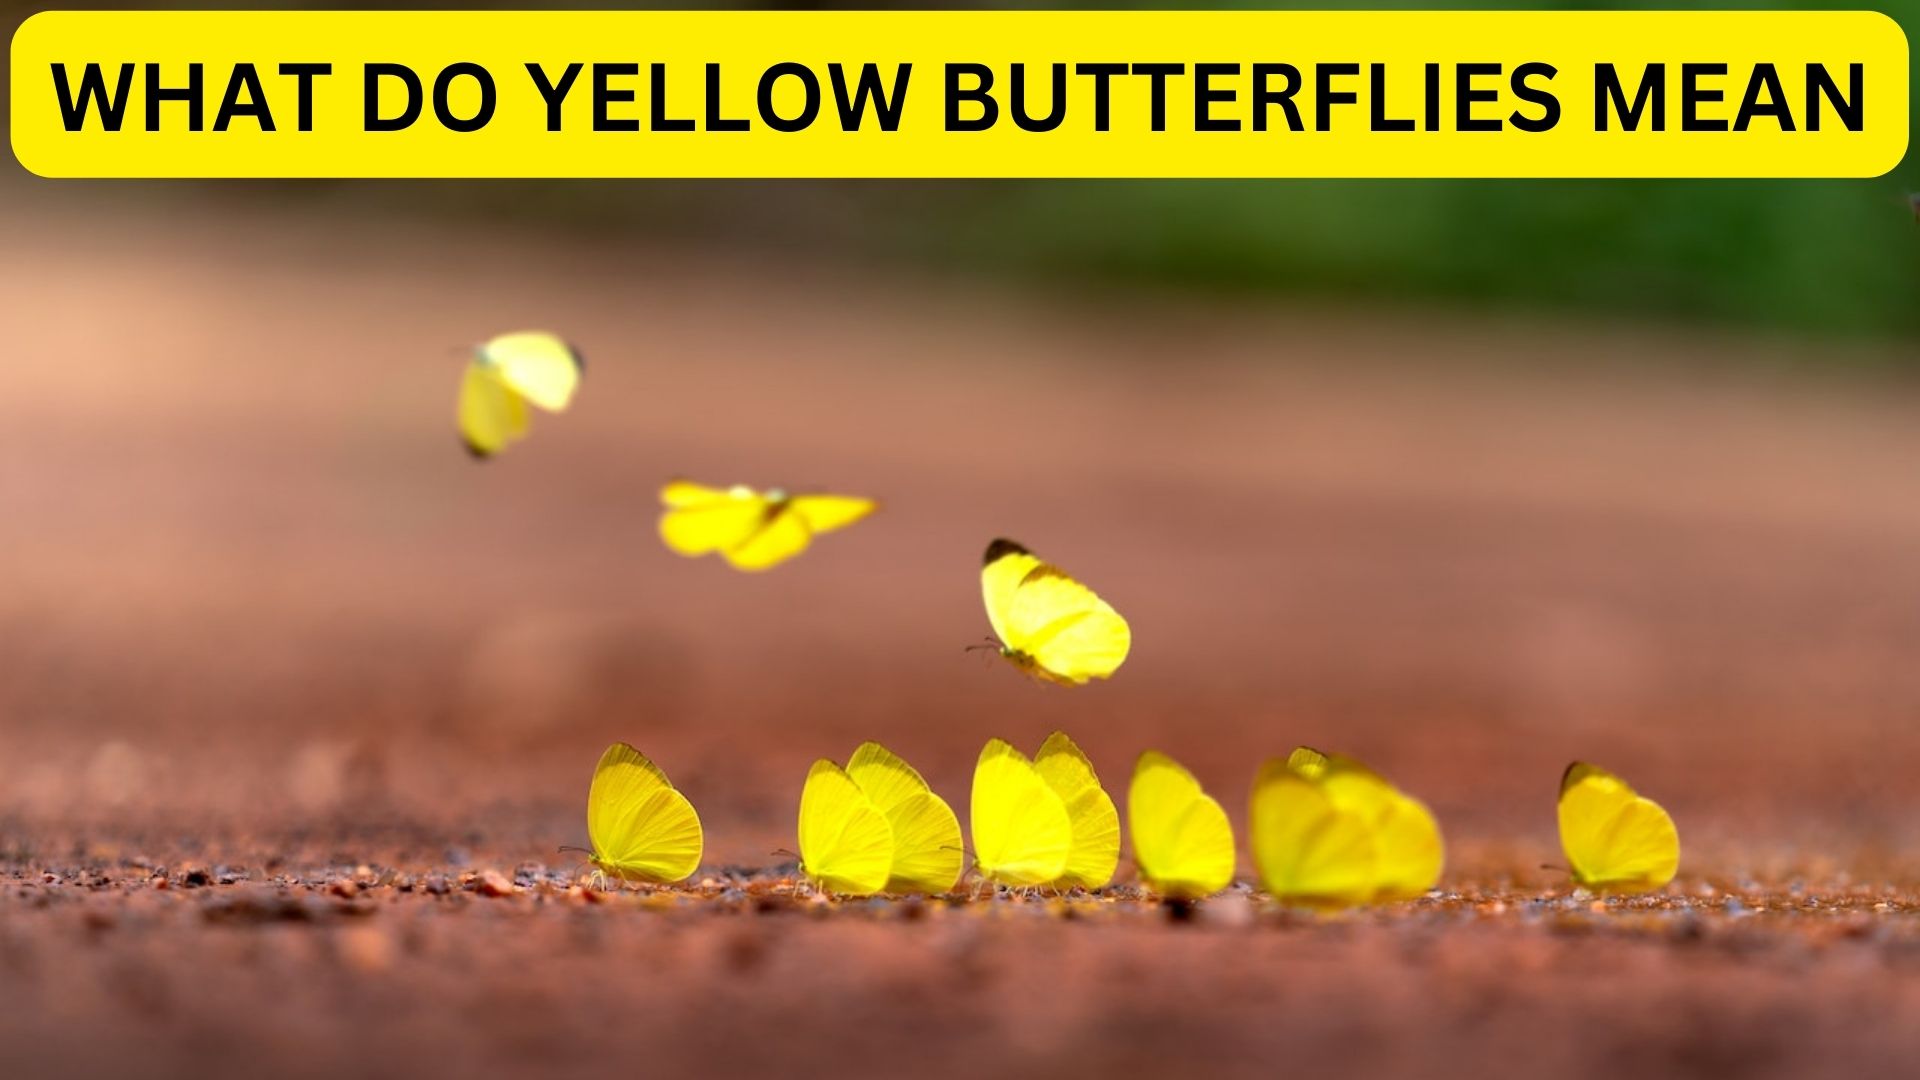 What Do Yellow Butterflies Mean? New Life And Rebirth